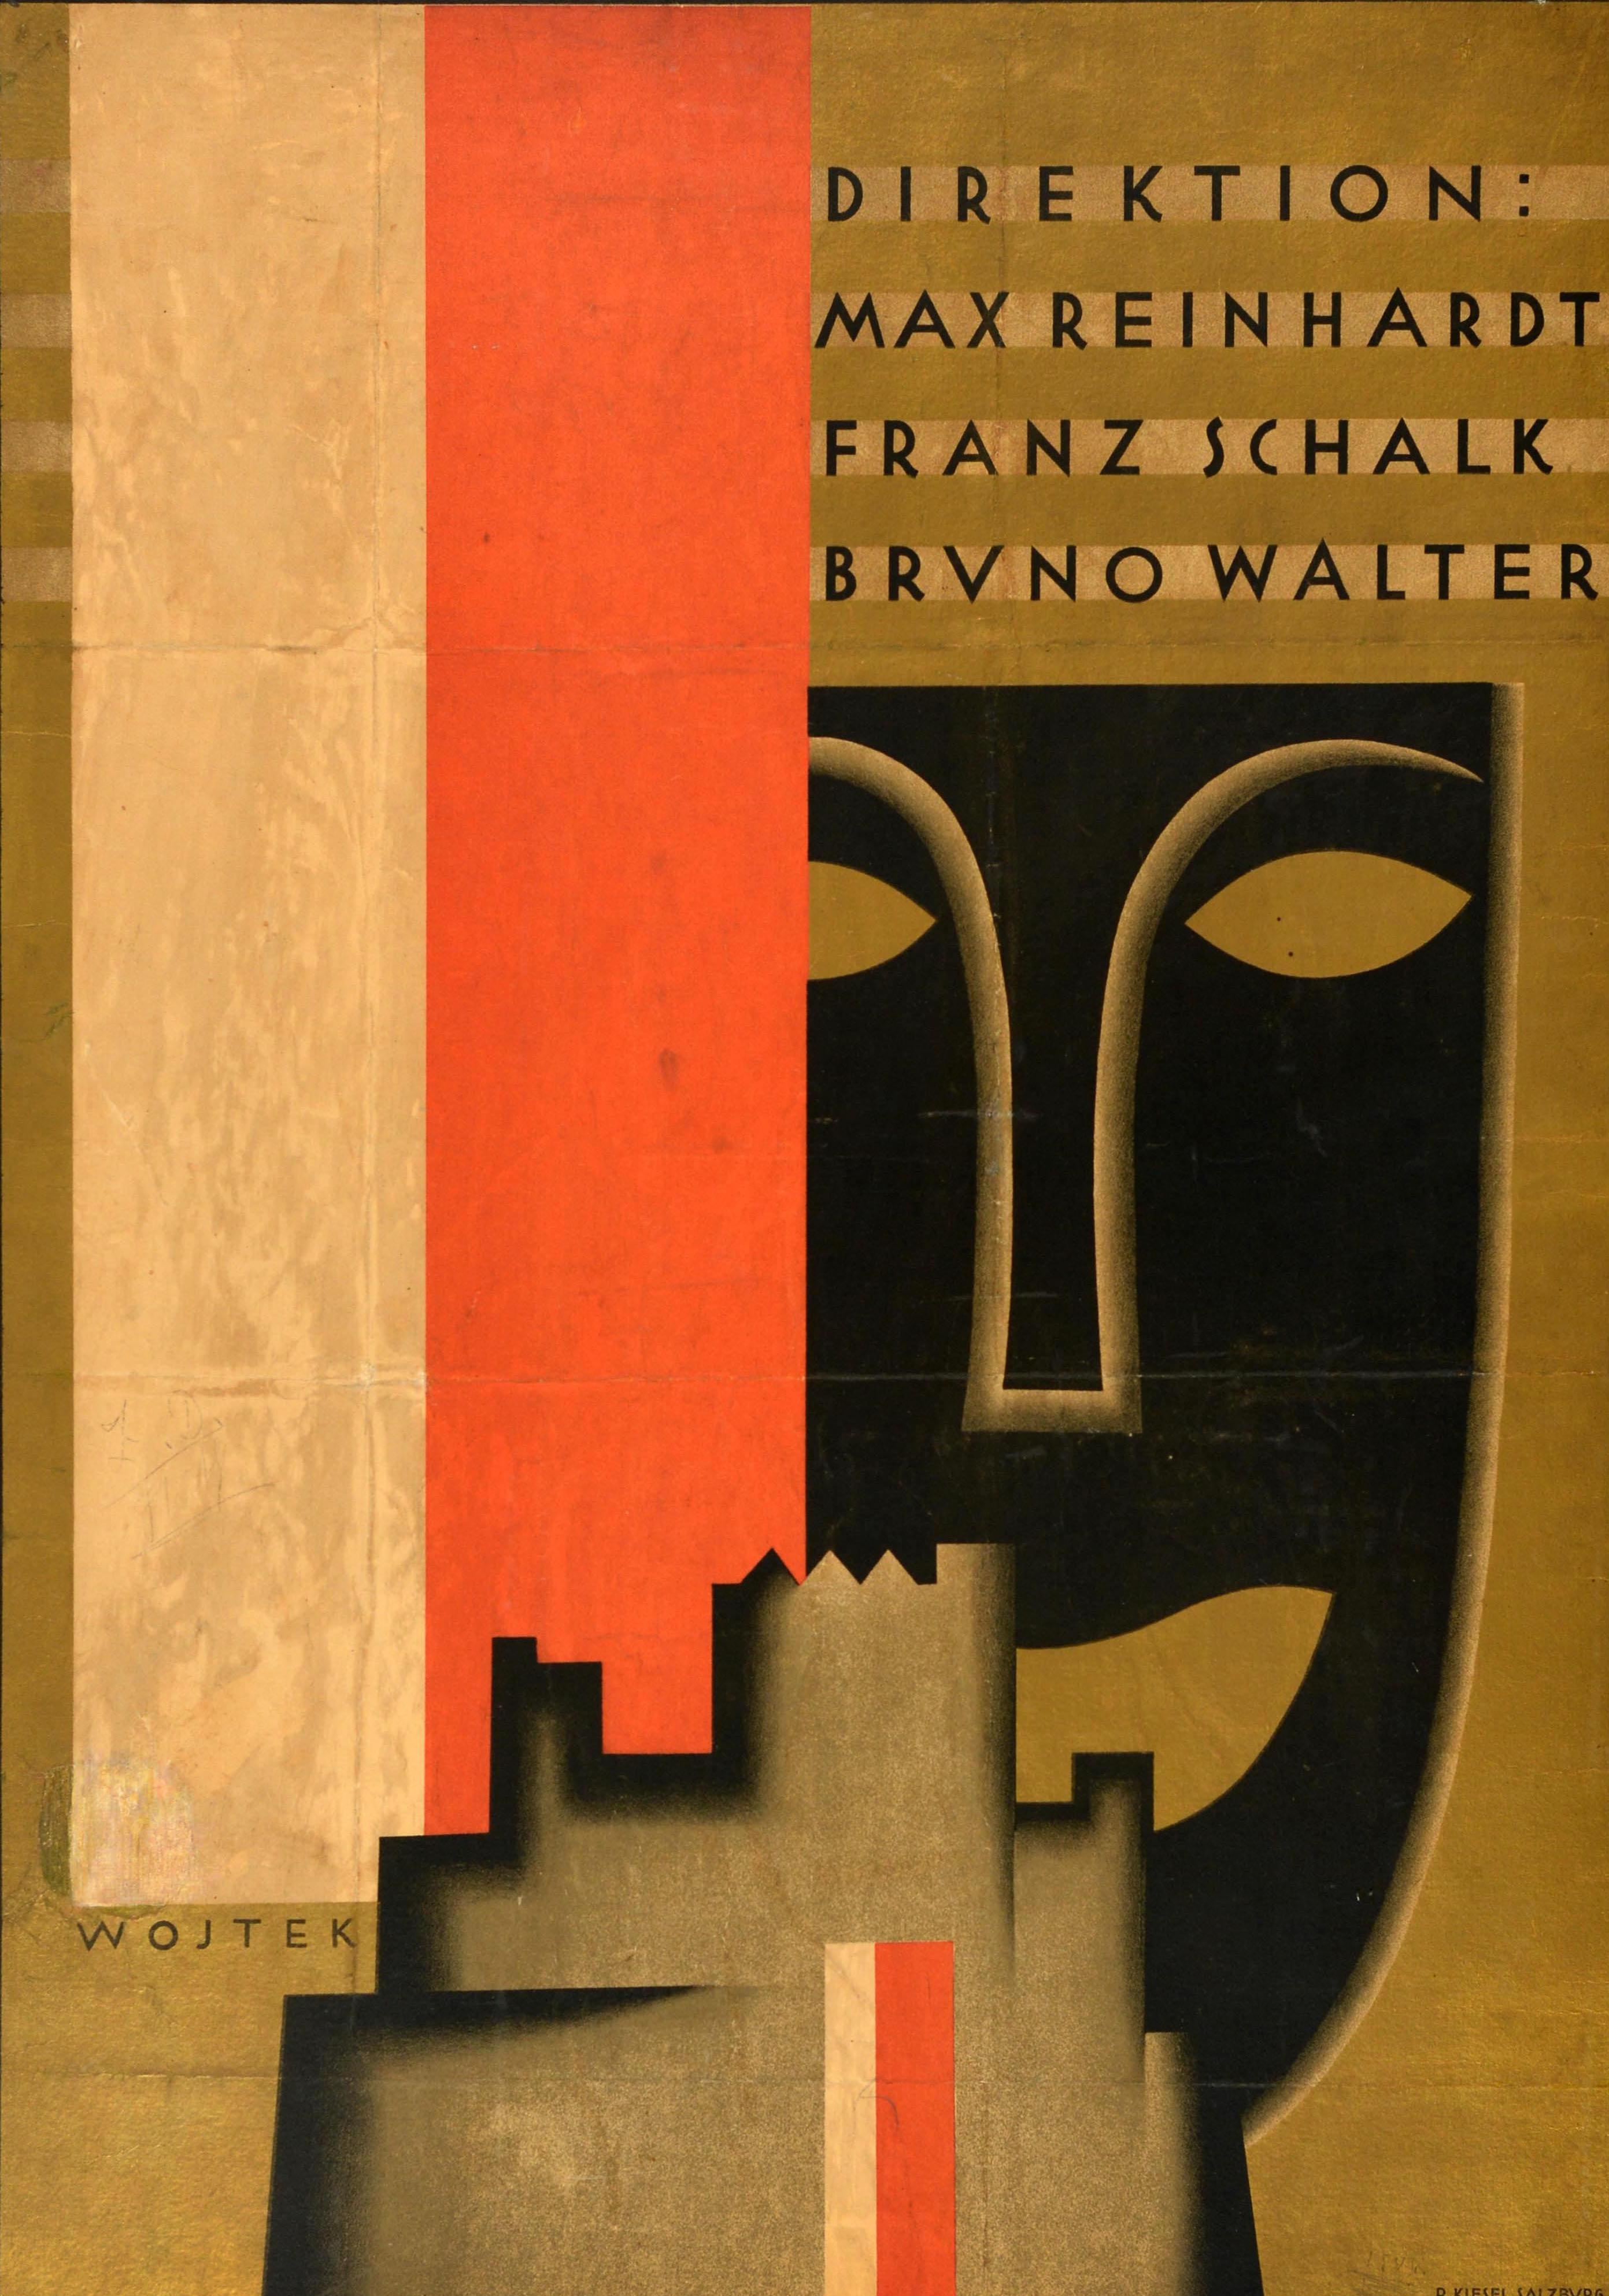 Original vintage advertising poster for the Salzburger Festspiele / Salzburg Festival from 26 July to 30 August 1928 under the management of Max Reinhardt, Franz Schalk and Bruno Walter, featuring a great design depicting an outline of a castle in